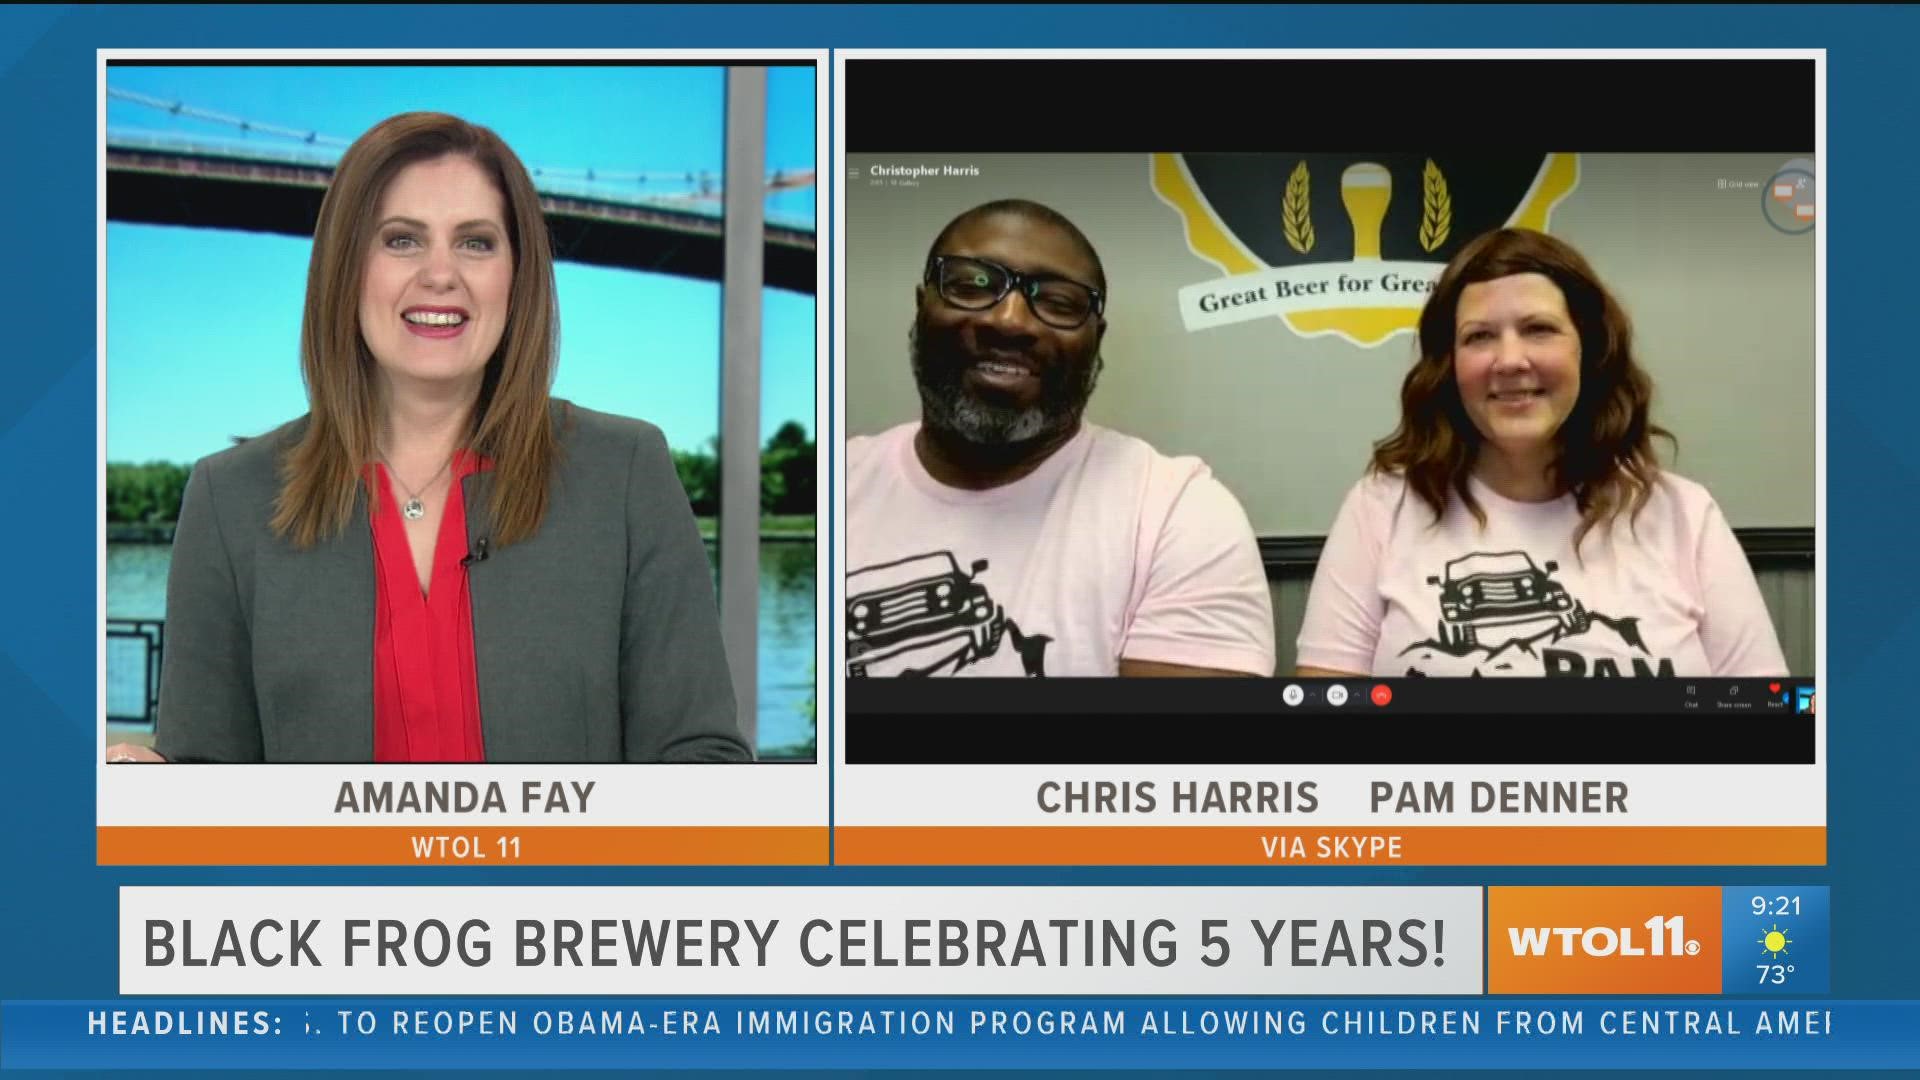 Black Frog Brewery is celebrating 5 years in business with Pam Jam to benefit Susan G. Komen!